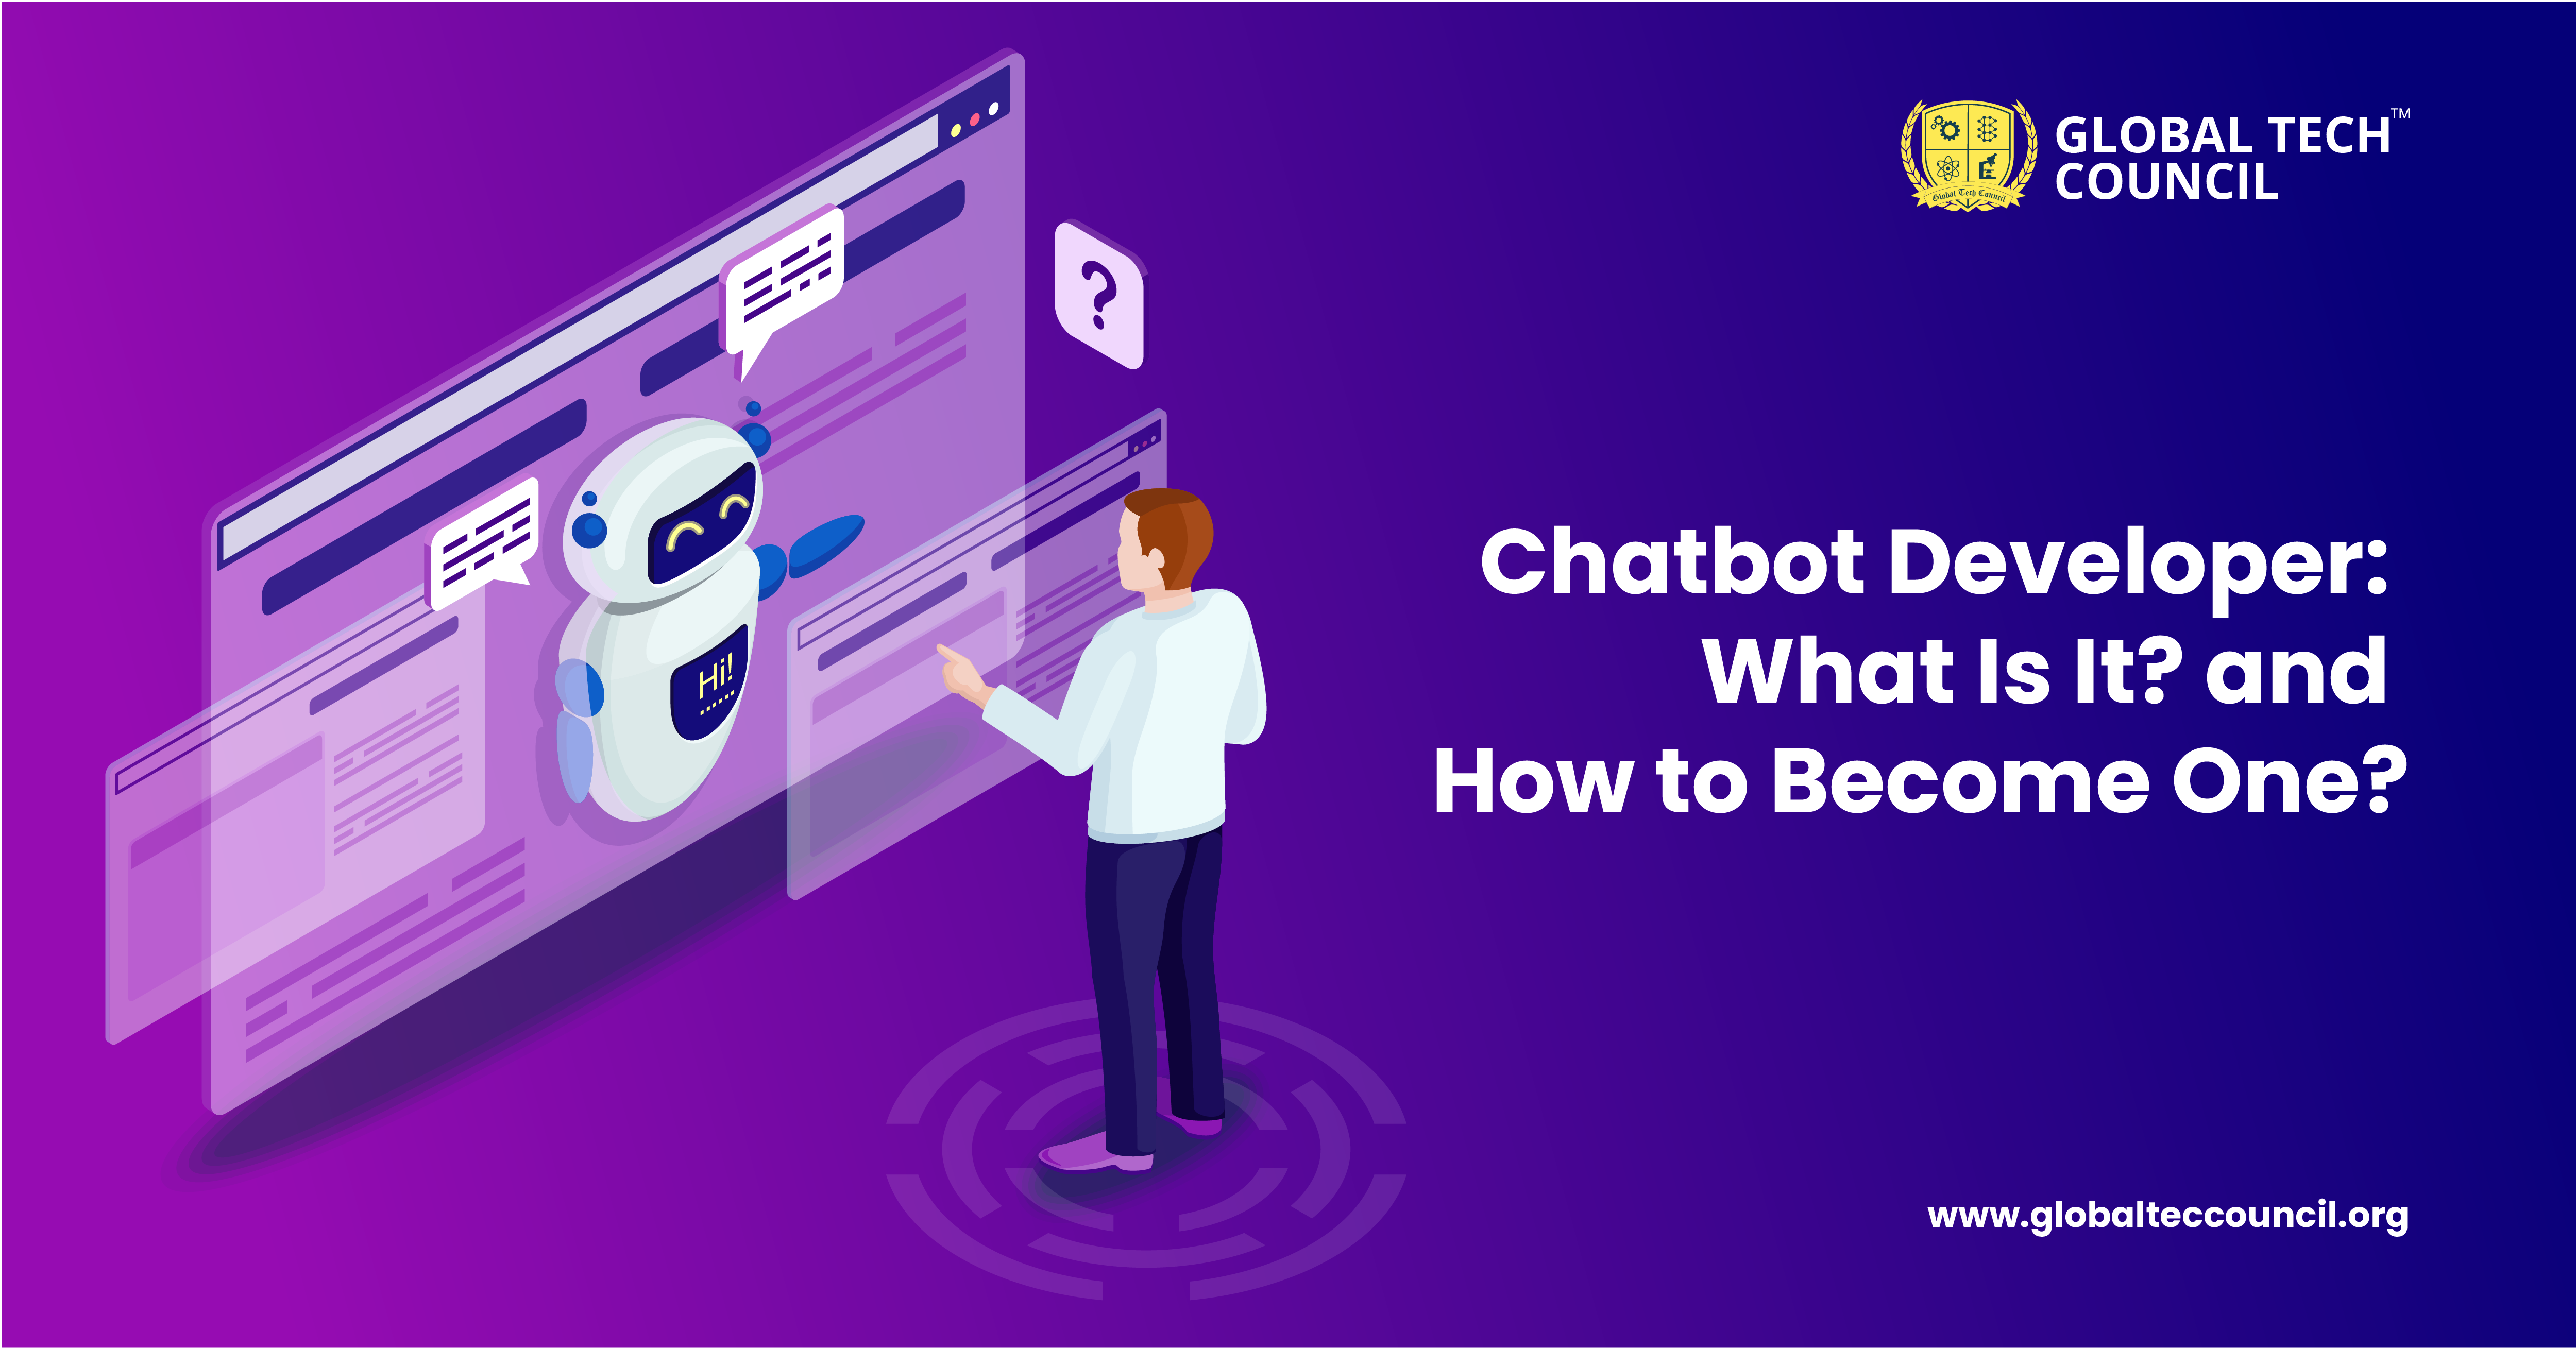 Chatbot Developer What Is It and How to Become One